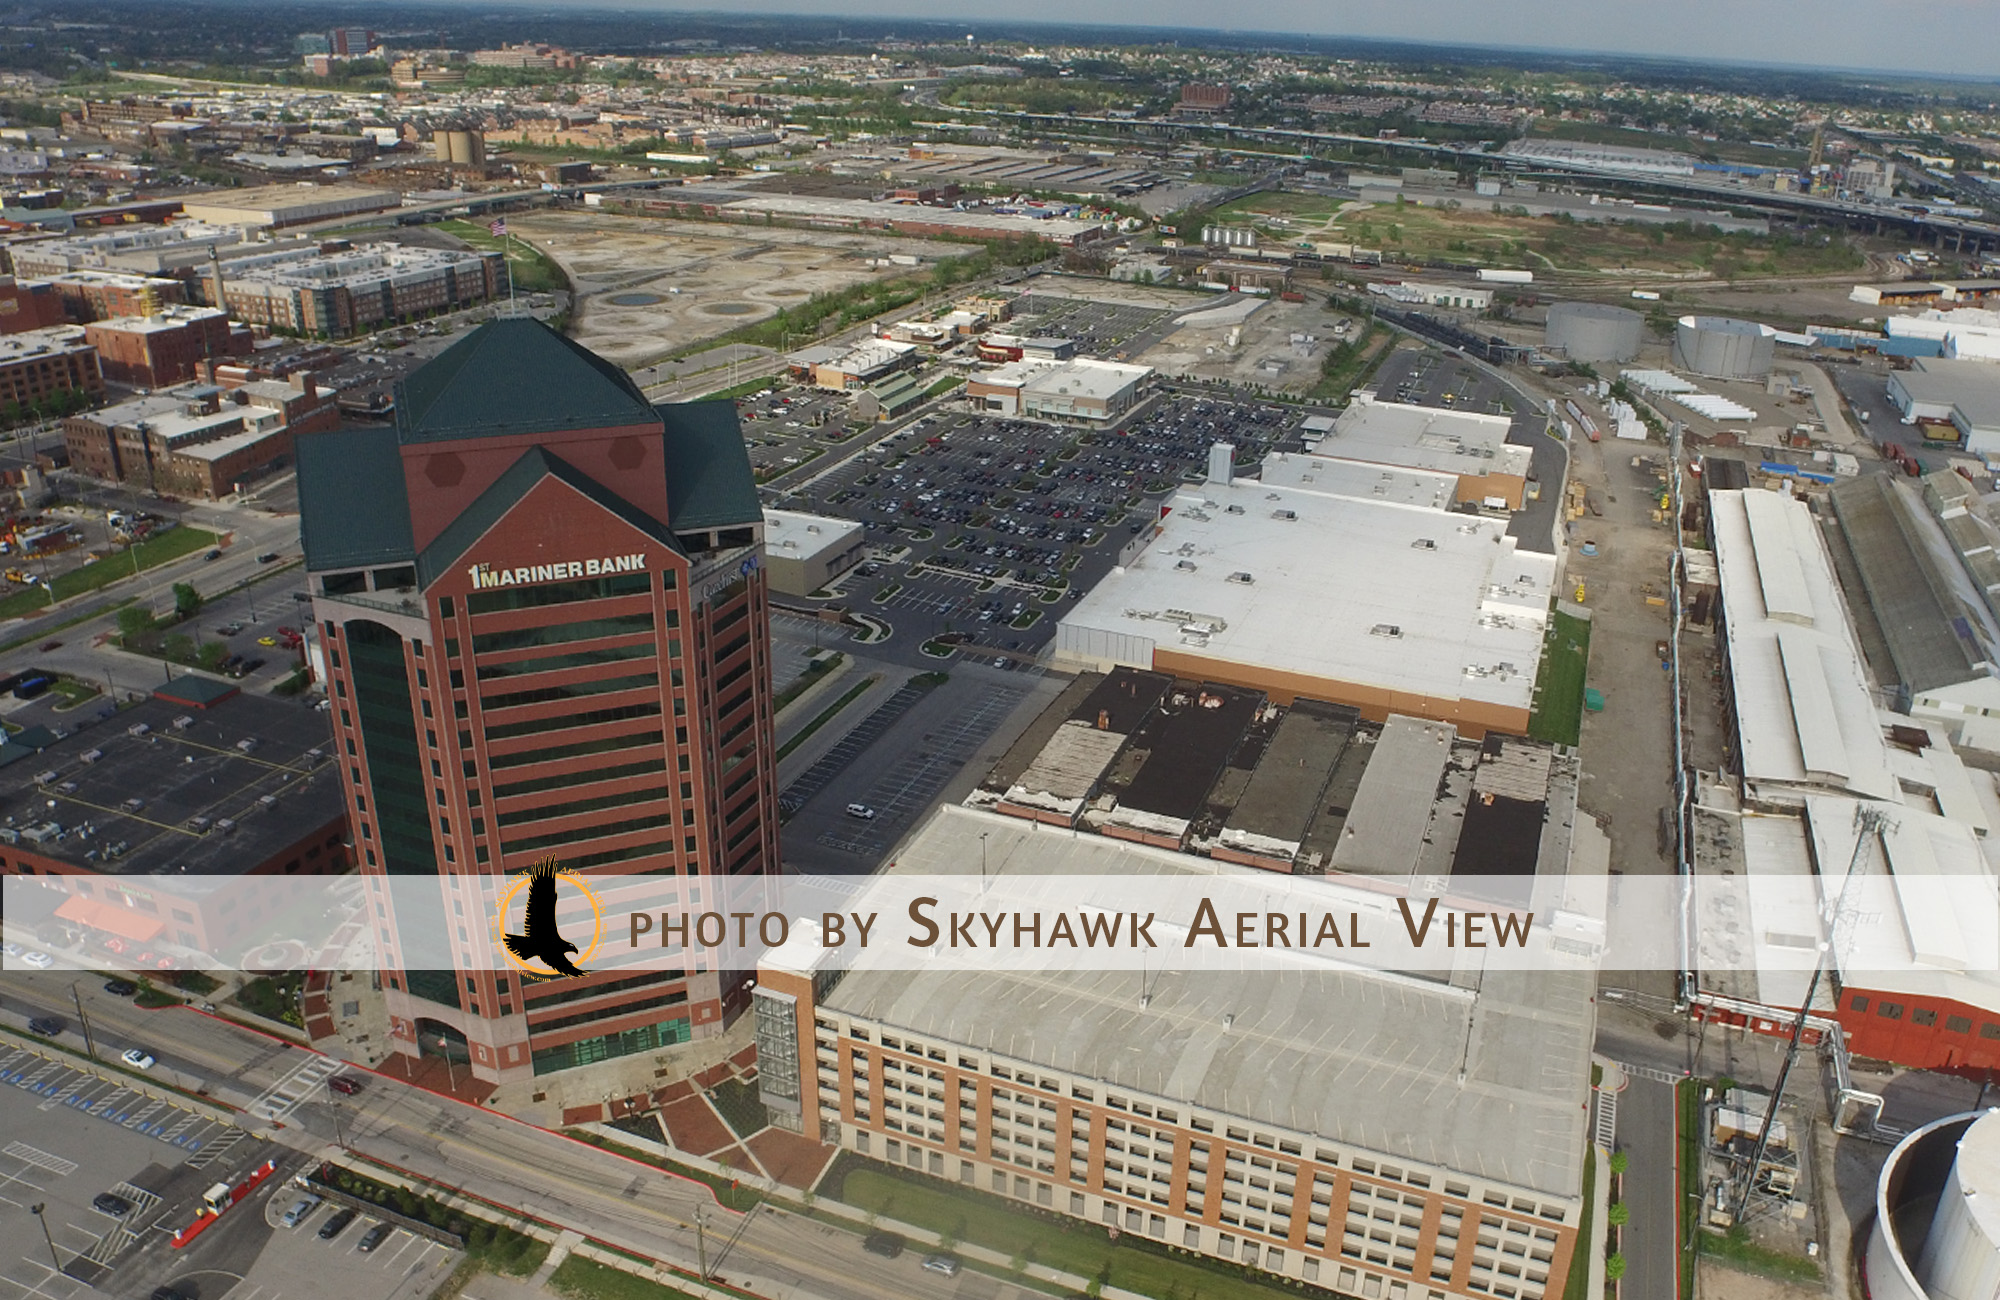 Commercial properties photography by Skyhawk Aerial View